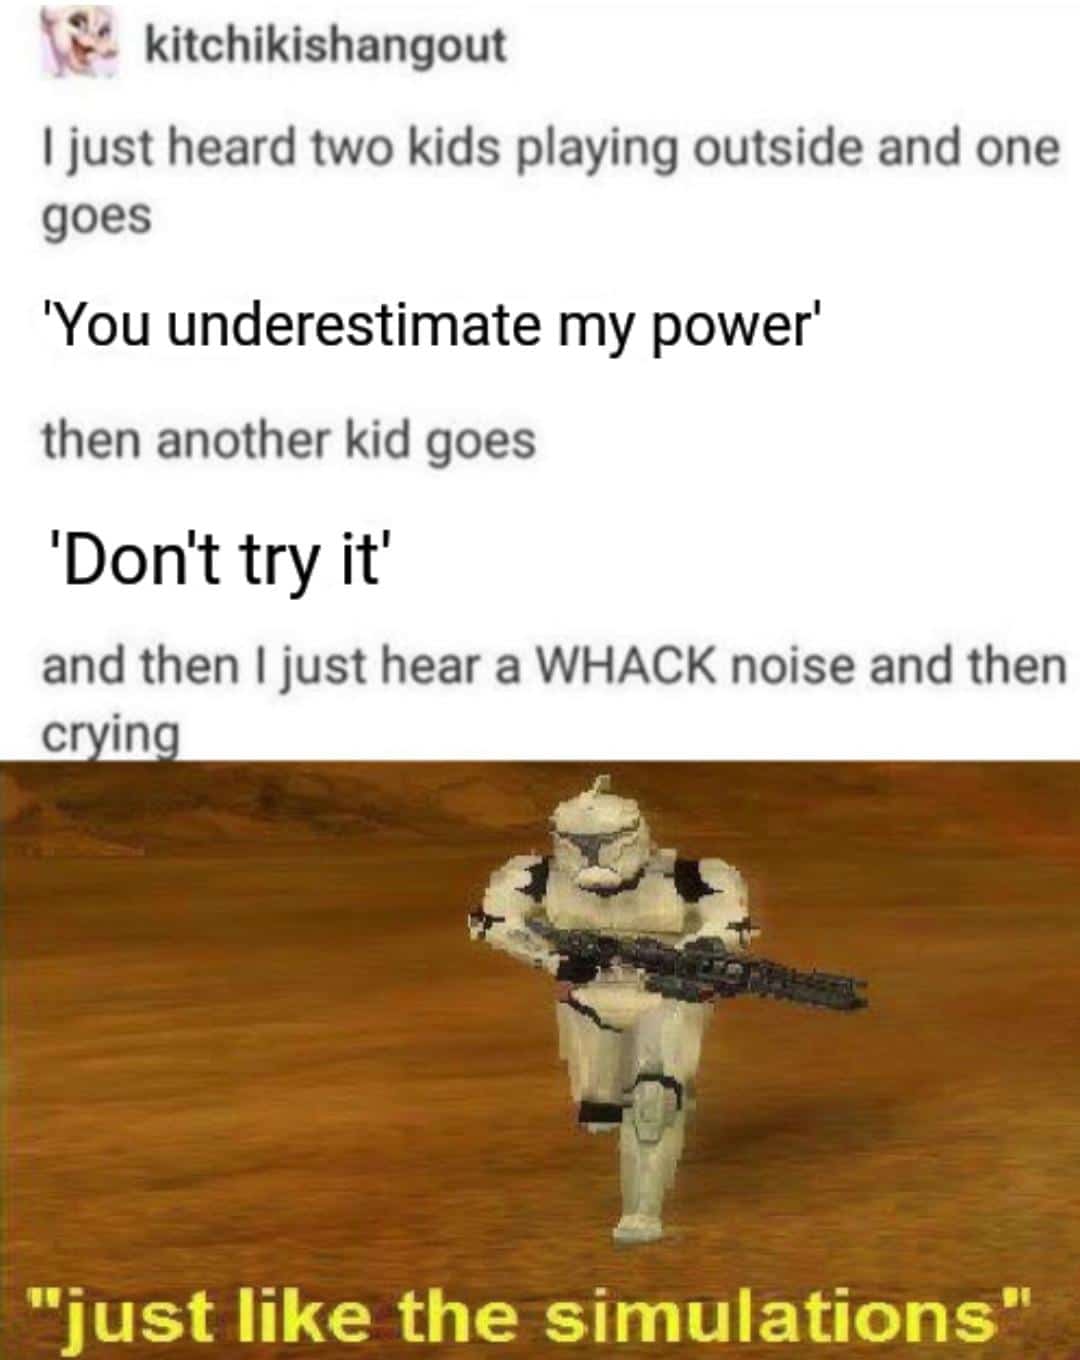 Prequel-memes, Reddit, Visit, PrequelMemes, OC, Negative Star Wars Memes Prequel-memes, Reddit, Visit, PrequelMemes, OC, Negative text: kitchikishangout I just heard two kids playing outside and one goes 'You underestimate my power' then another kid goes 'Don't try it' and then I just hear a WHACK noise and then c in 